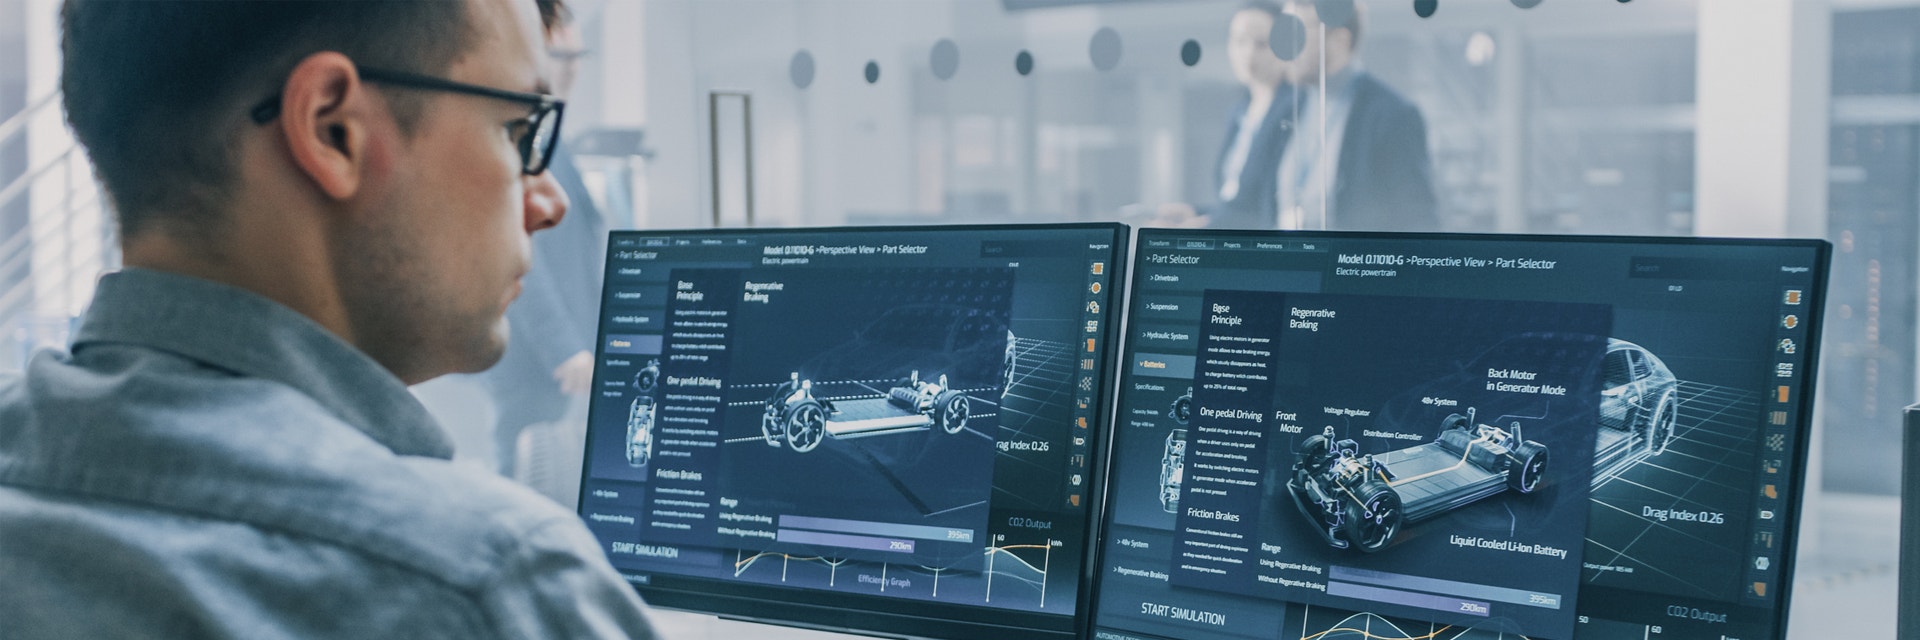 Man looking at automotive designs on computer screens